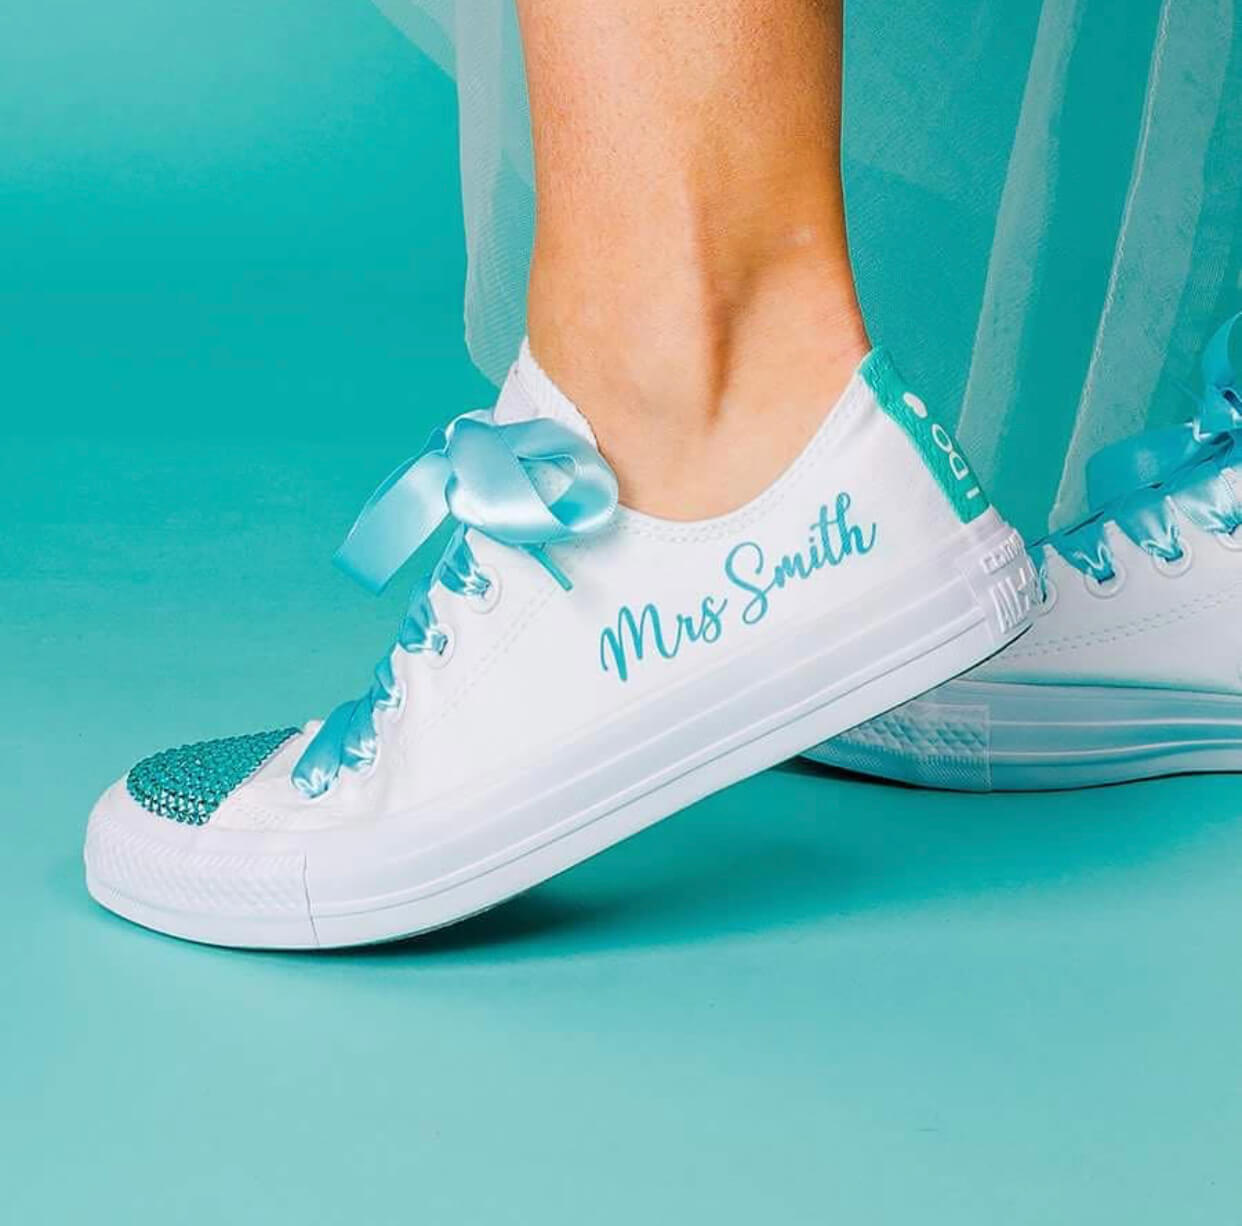 Customising Sneakers for Your Wedding